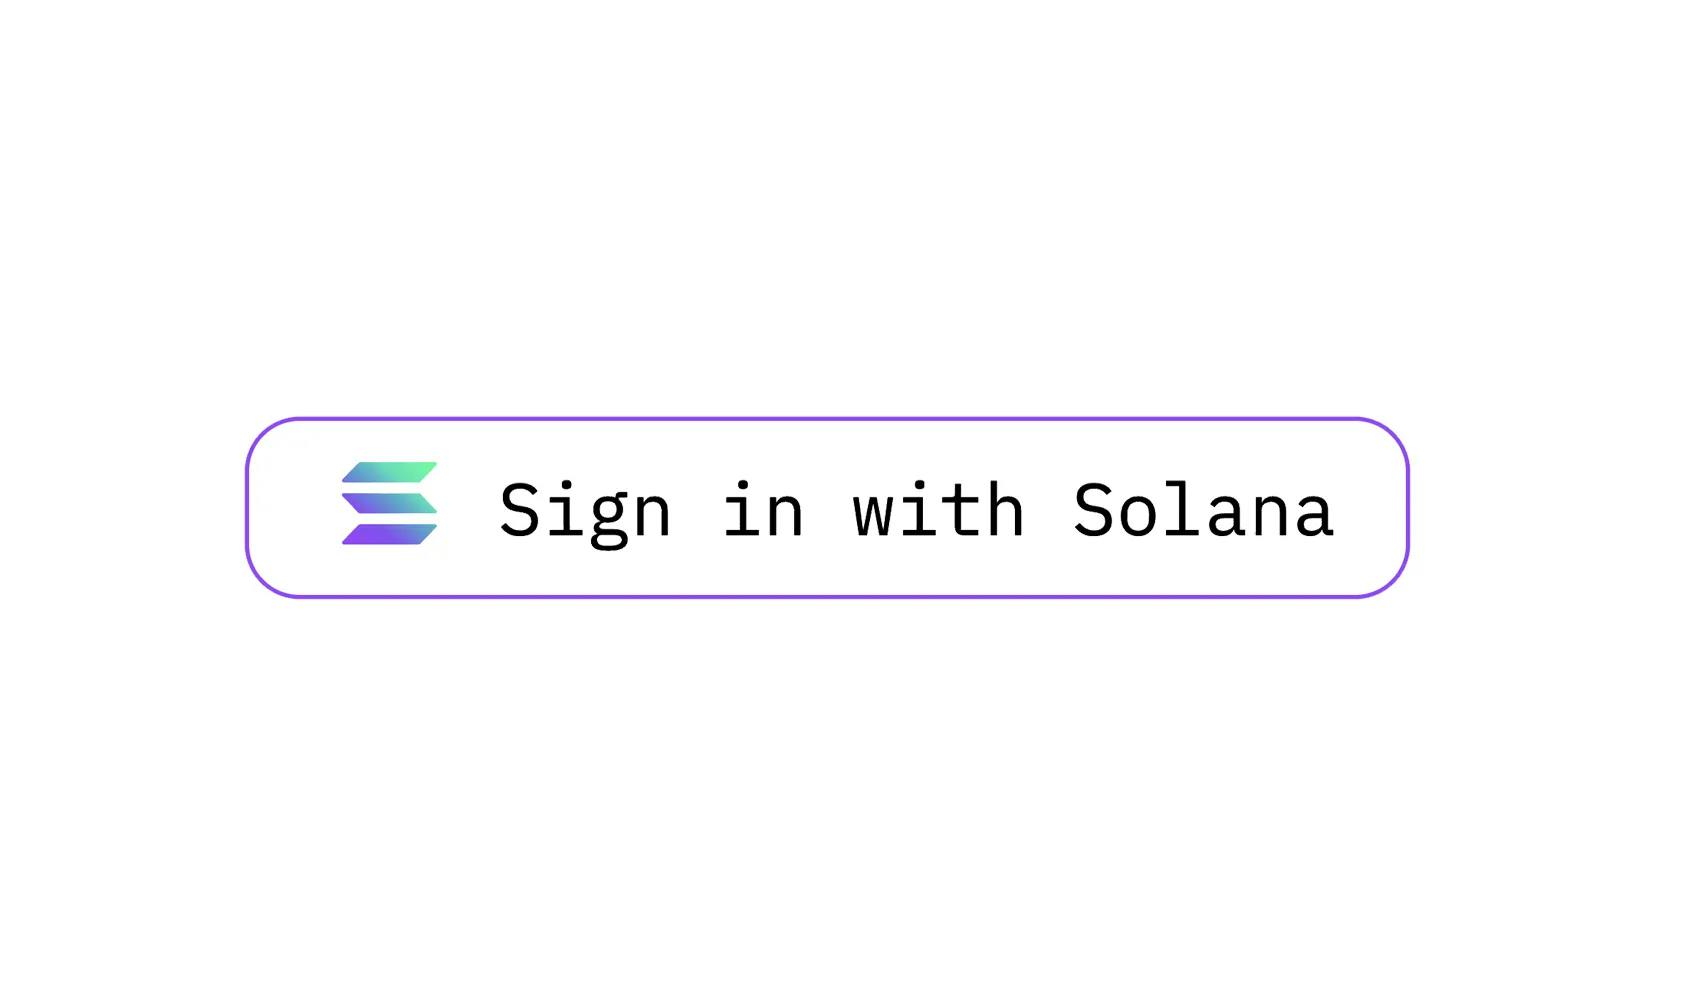 Sign in with Solana